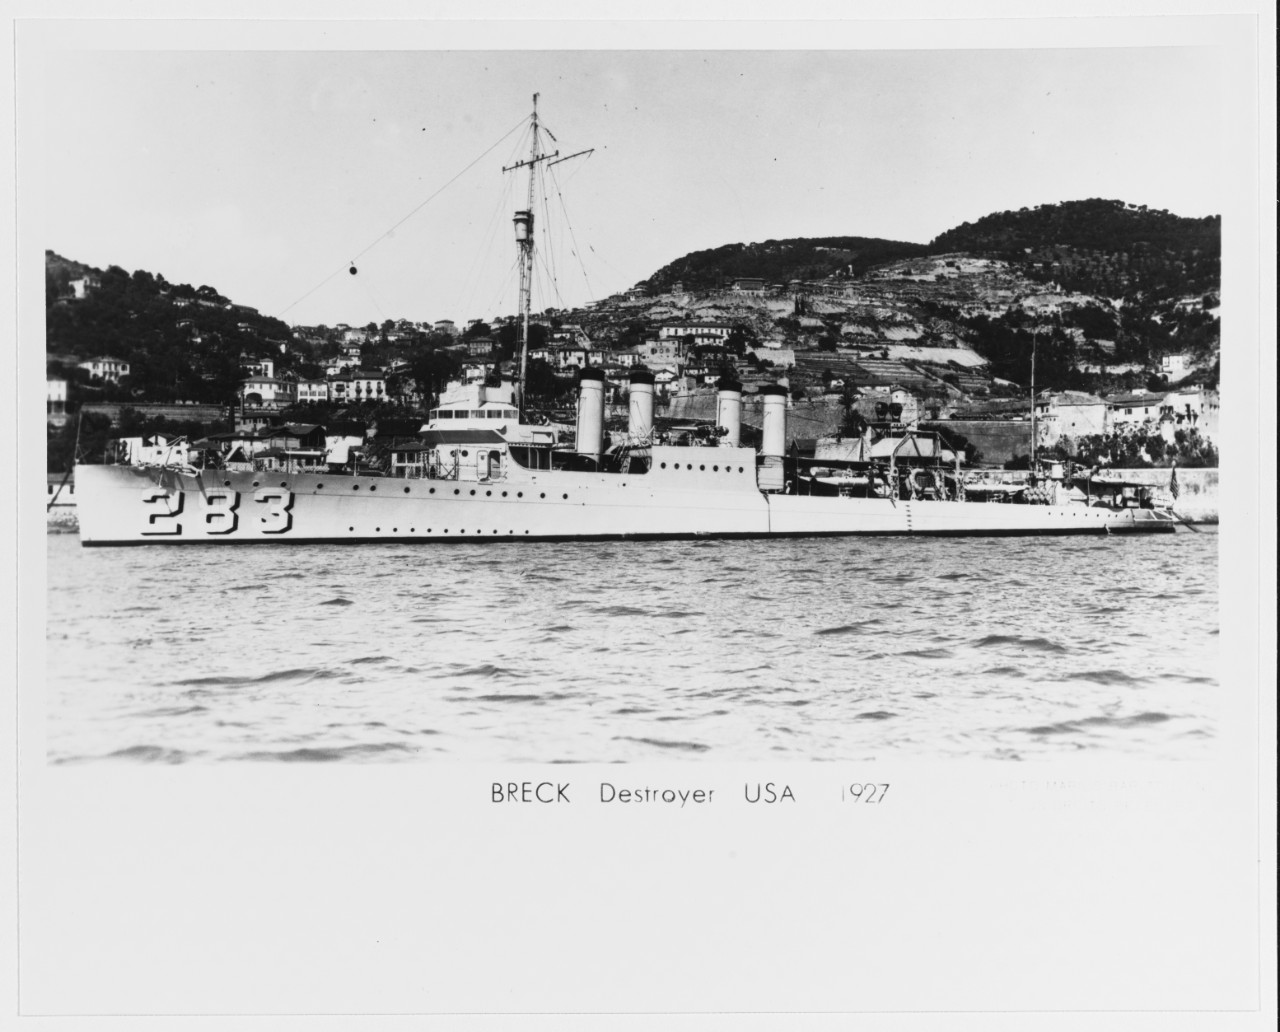 USS BRECK (DD-283) at Toulon, France.